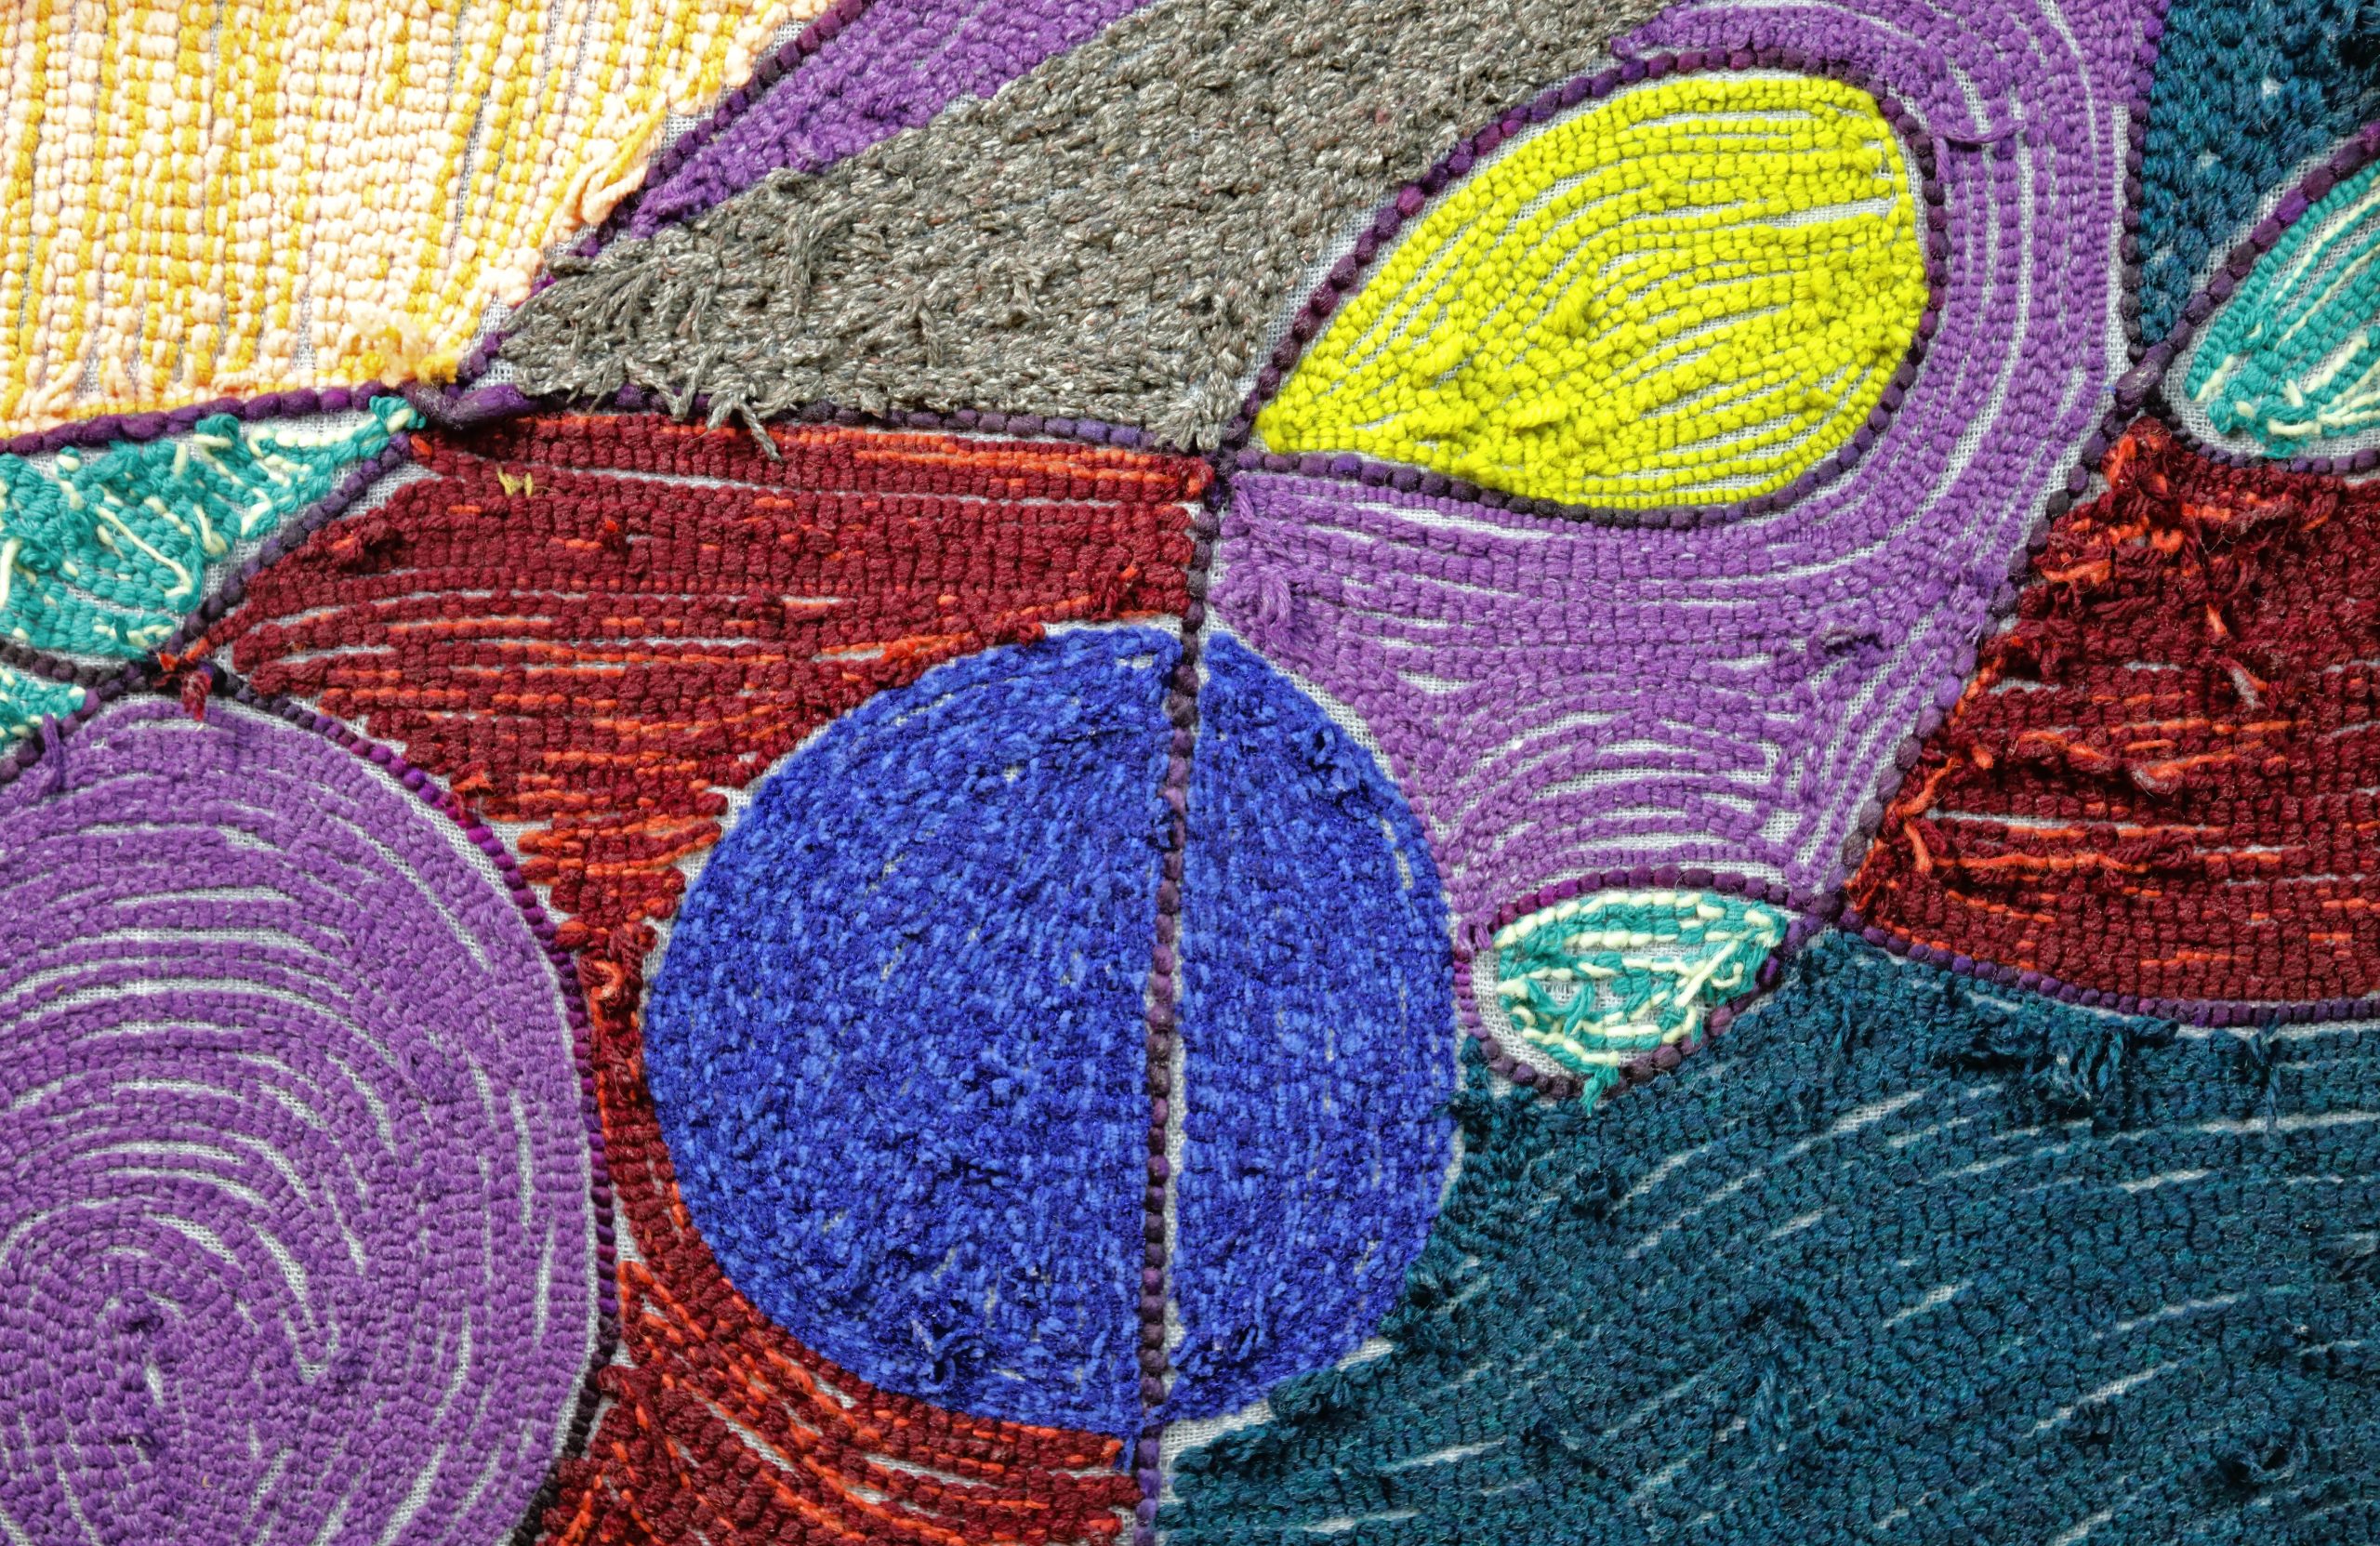 A zoomed-in detail of the back of a soft painting with a purple running line tracing some looped shapes. In the detail view, a large blue circle and smaller lime green oval are most prominent, with purple, gray and dark green in the background.